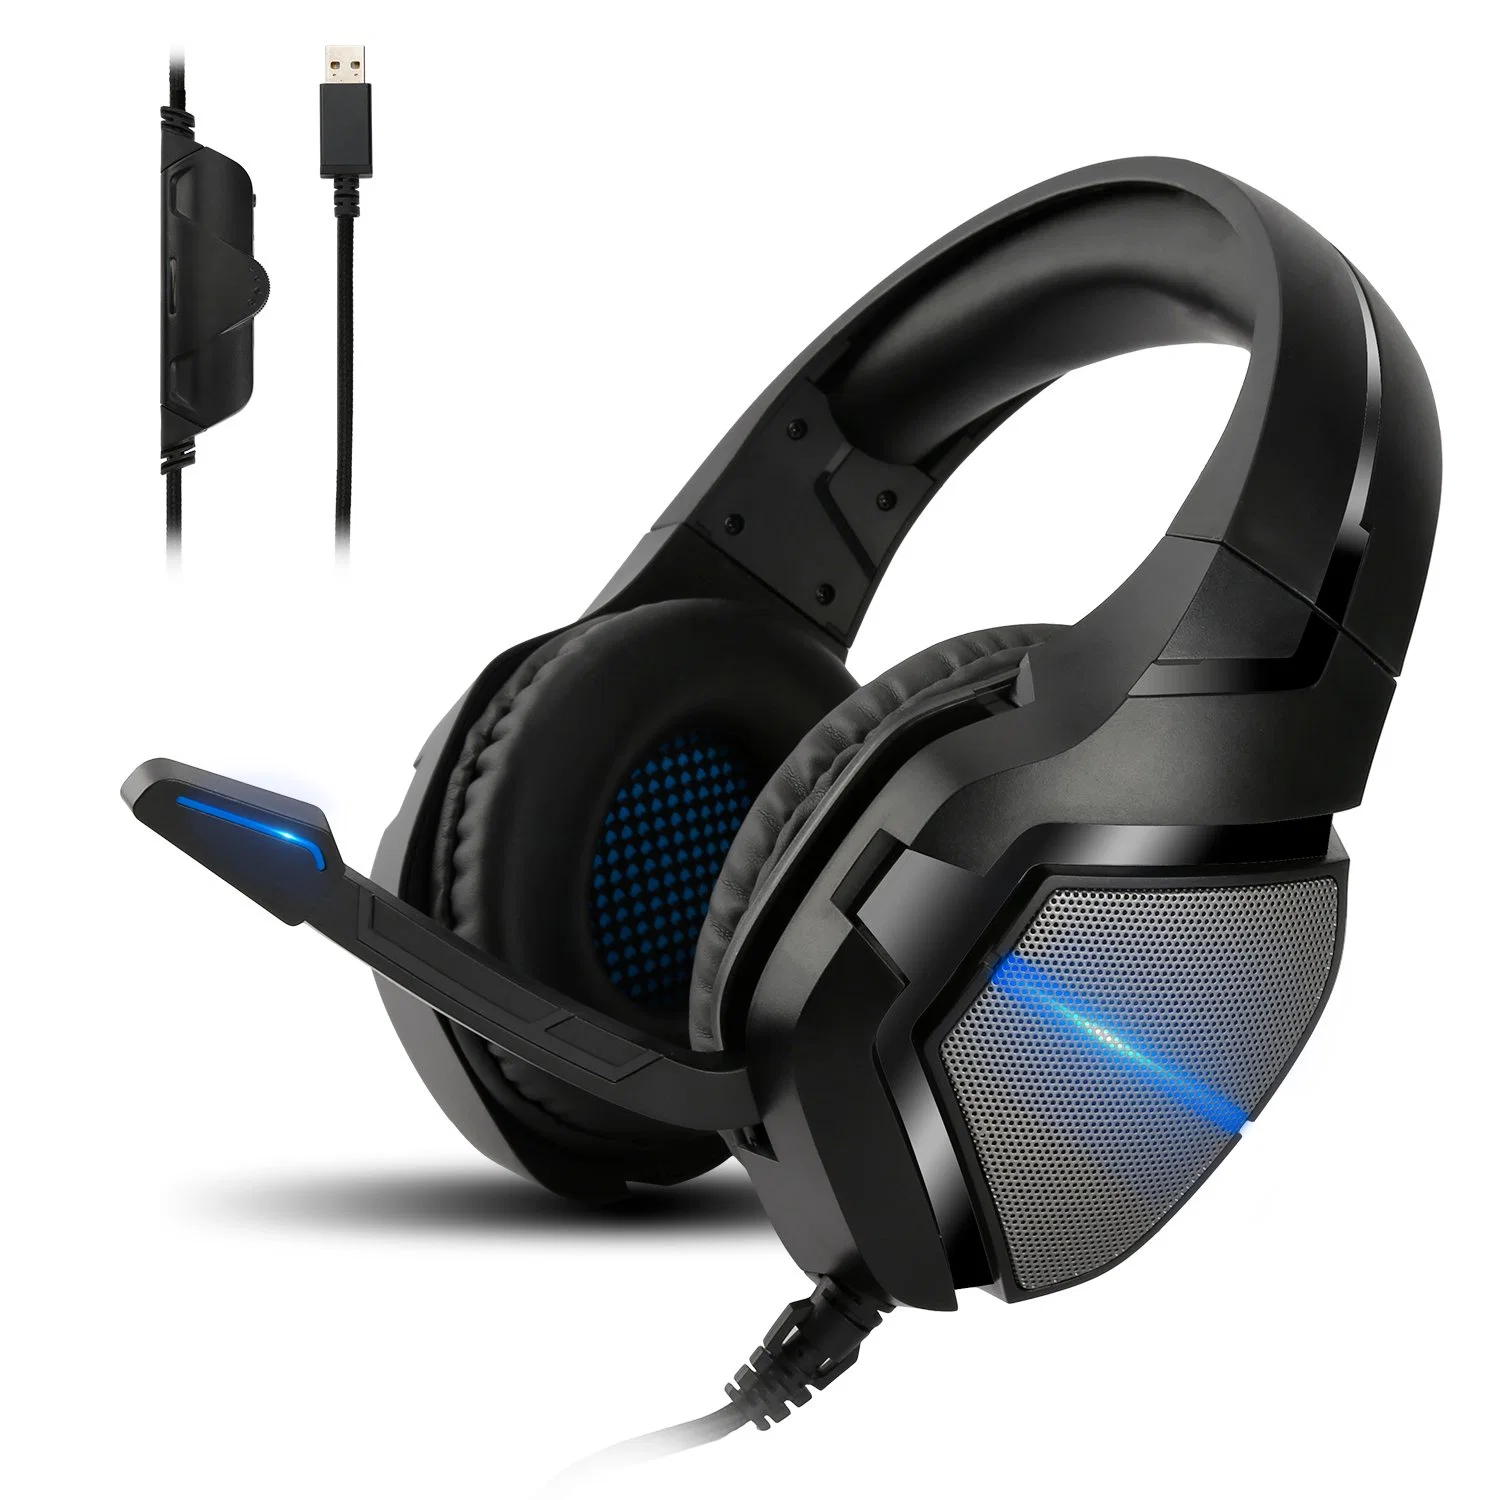 7.1 Channel RGB Gaming Headset for Computer/Laptop/PS4/xBox Slim/Switch Gamer Headphone with Vibration